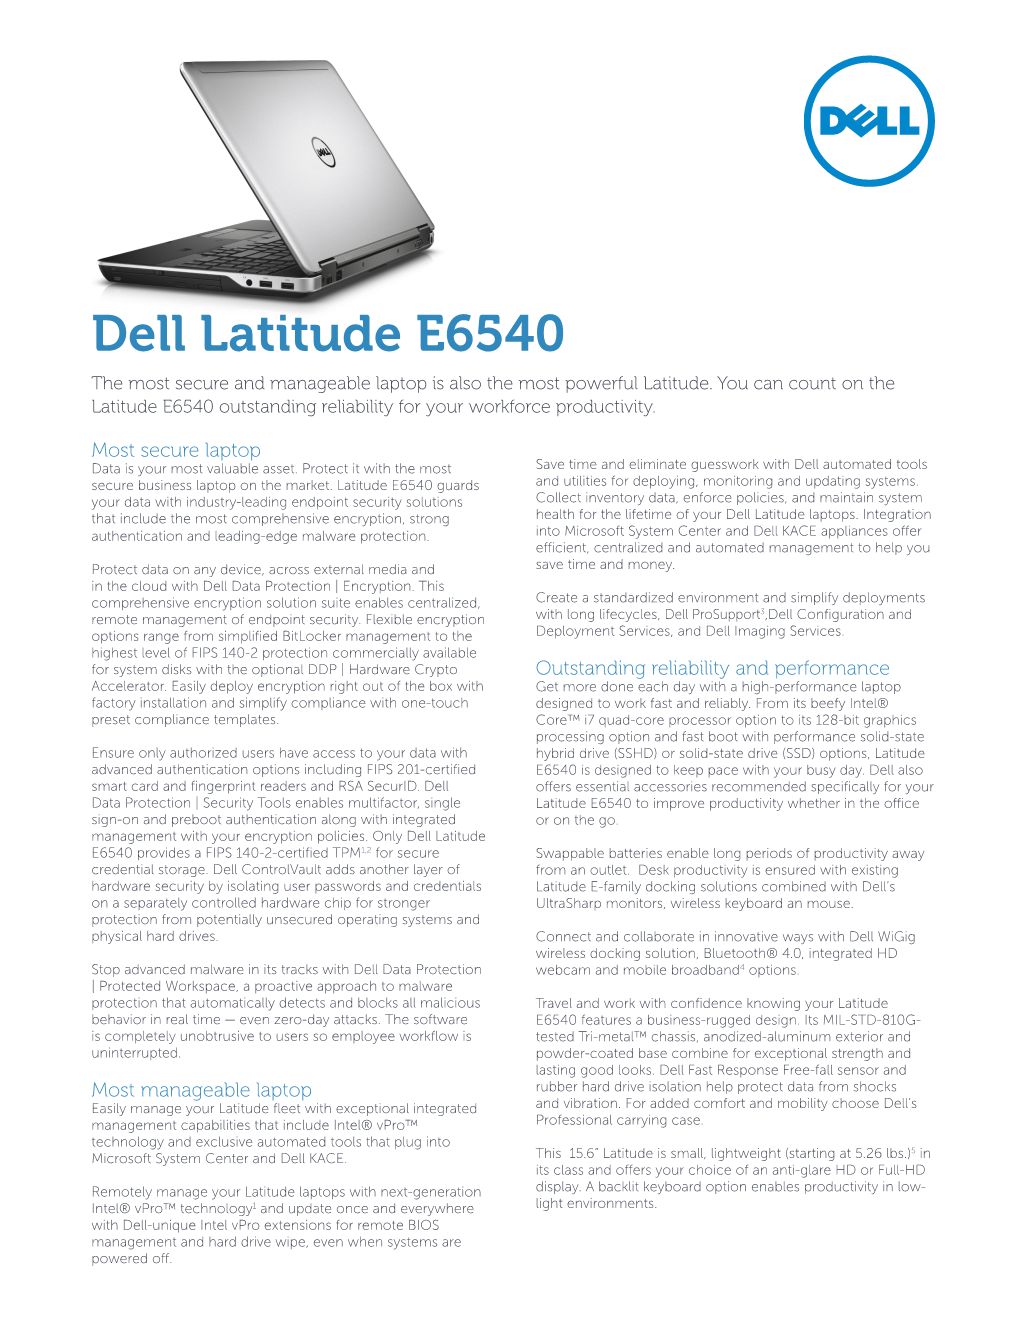 Dell Latitude E6540 the Most Secure and Manageable Laptop Is Also the Most Powerful Latitude